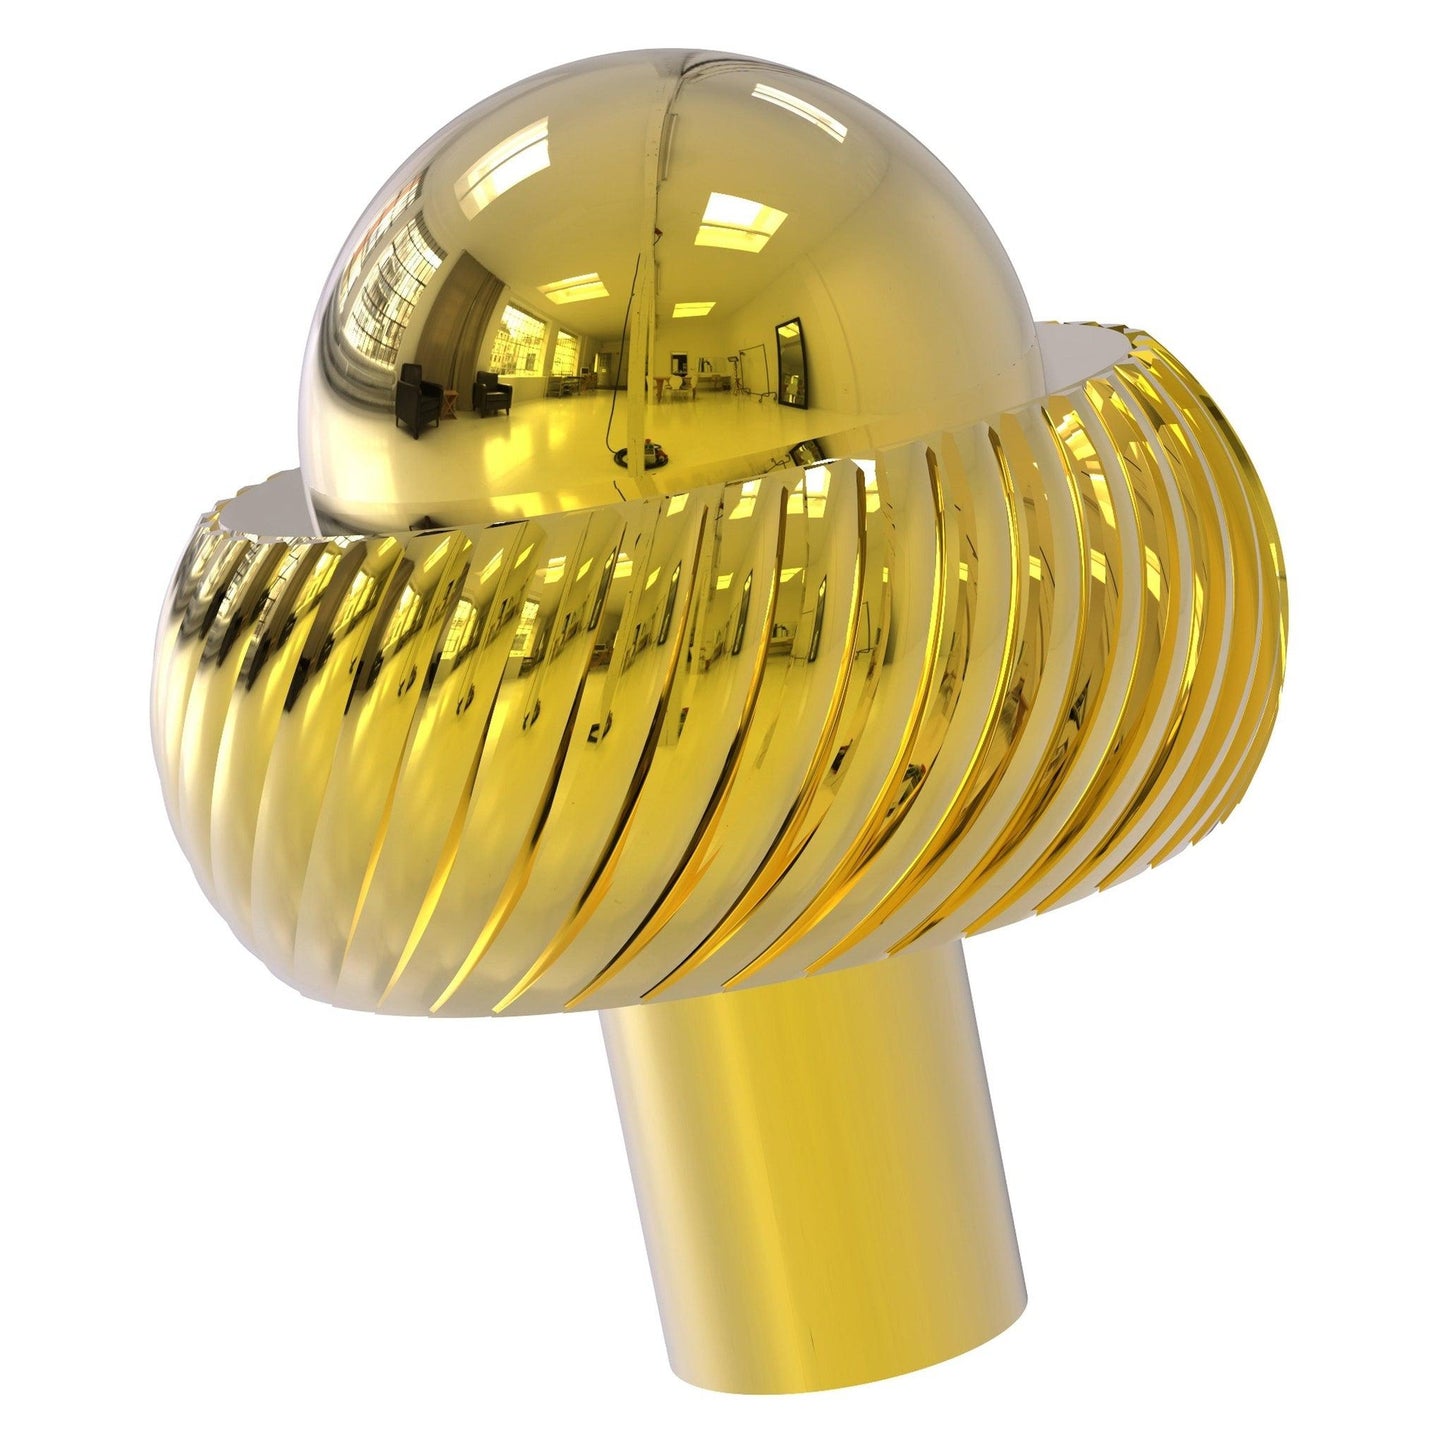 Allied Brass 101AT 1.5" Polished Brass Solid Brass Cabinet Knob